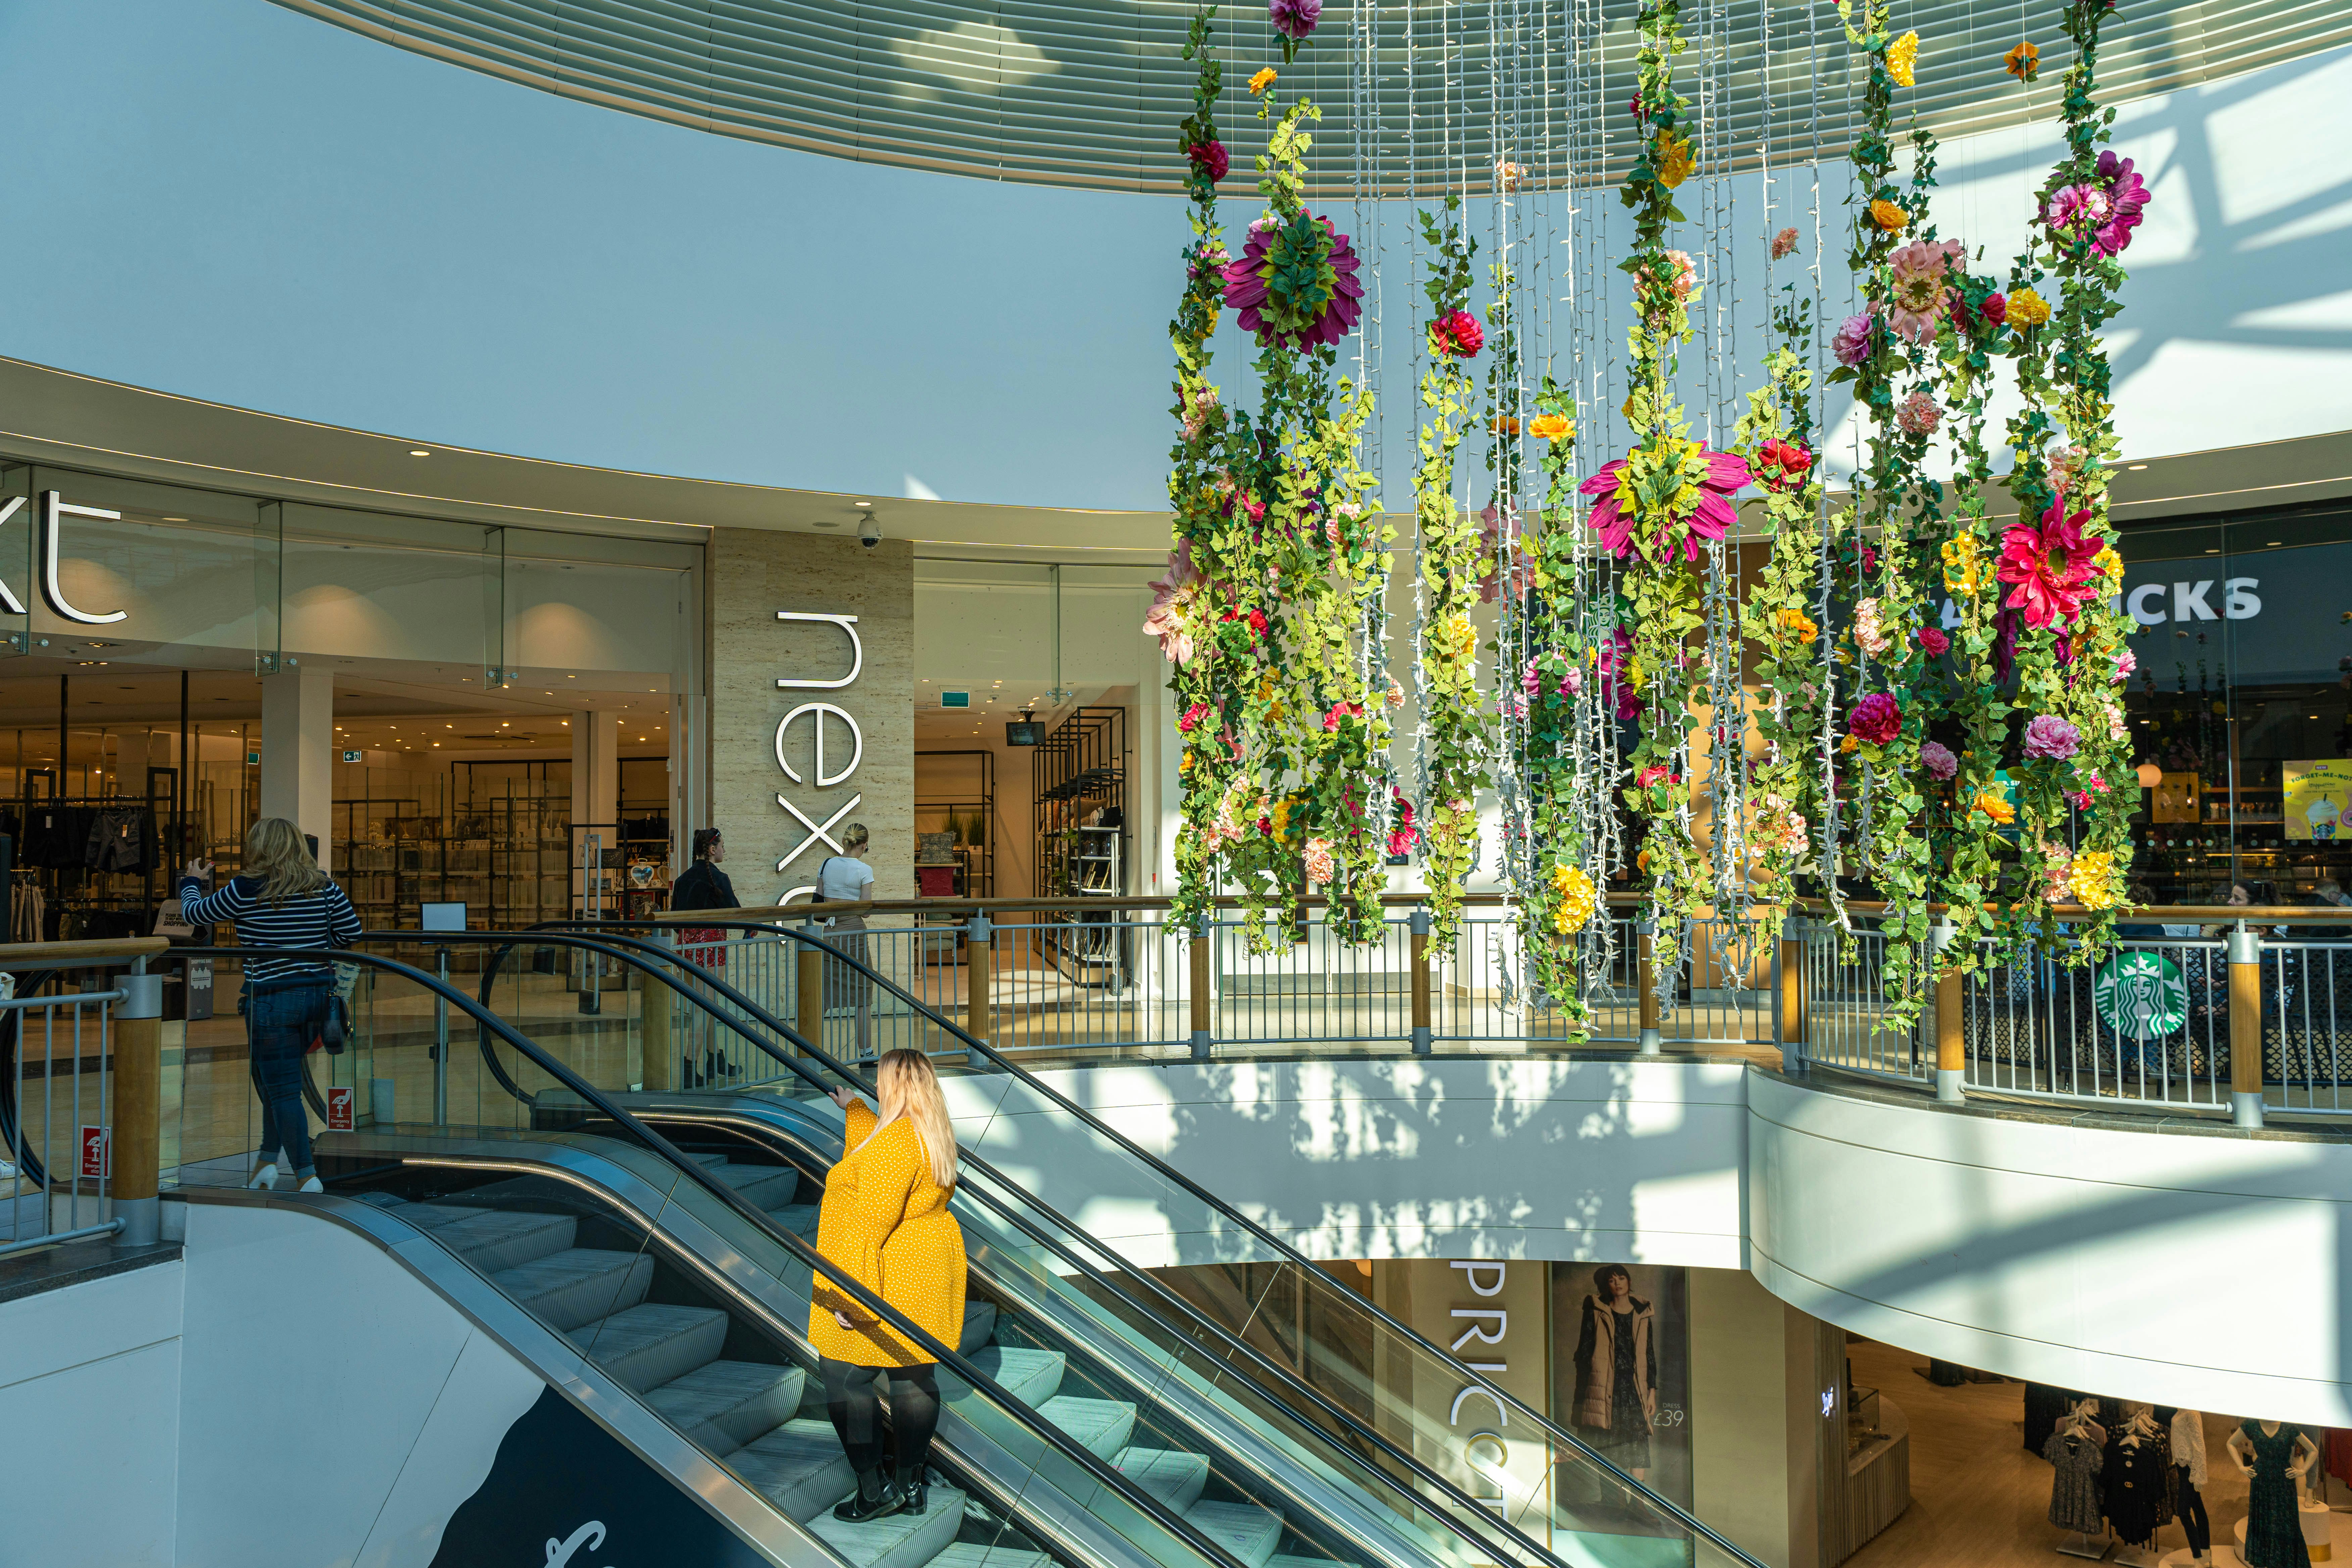 A lady wears a yellow dress and travels on an escalter inside a shopping centre. There is a large ceiling decoration with a floral arrangment.